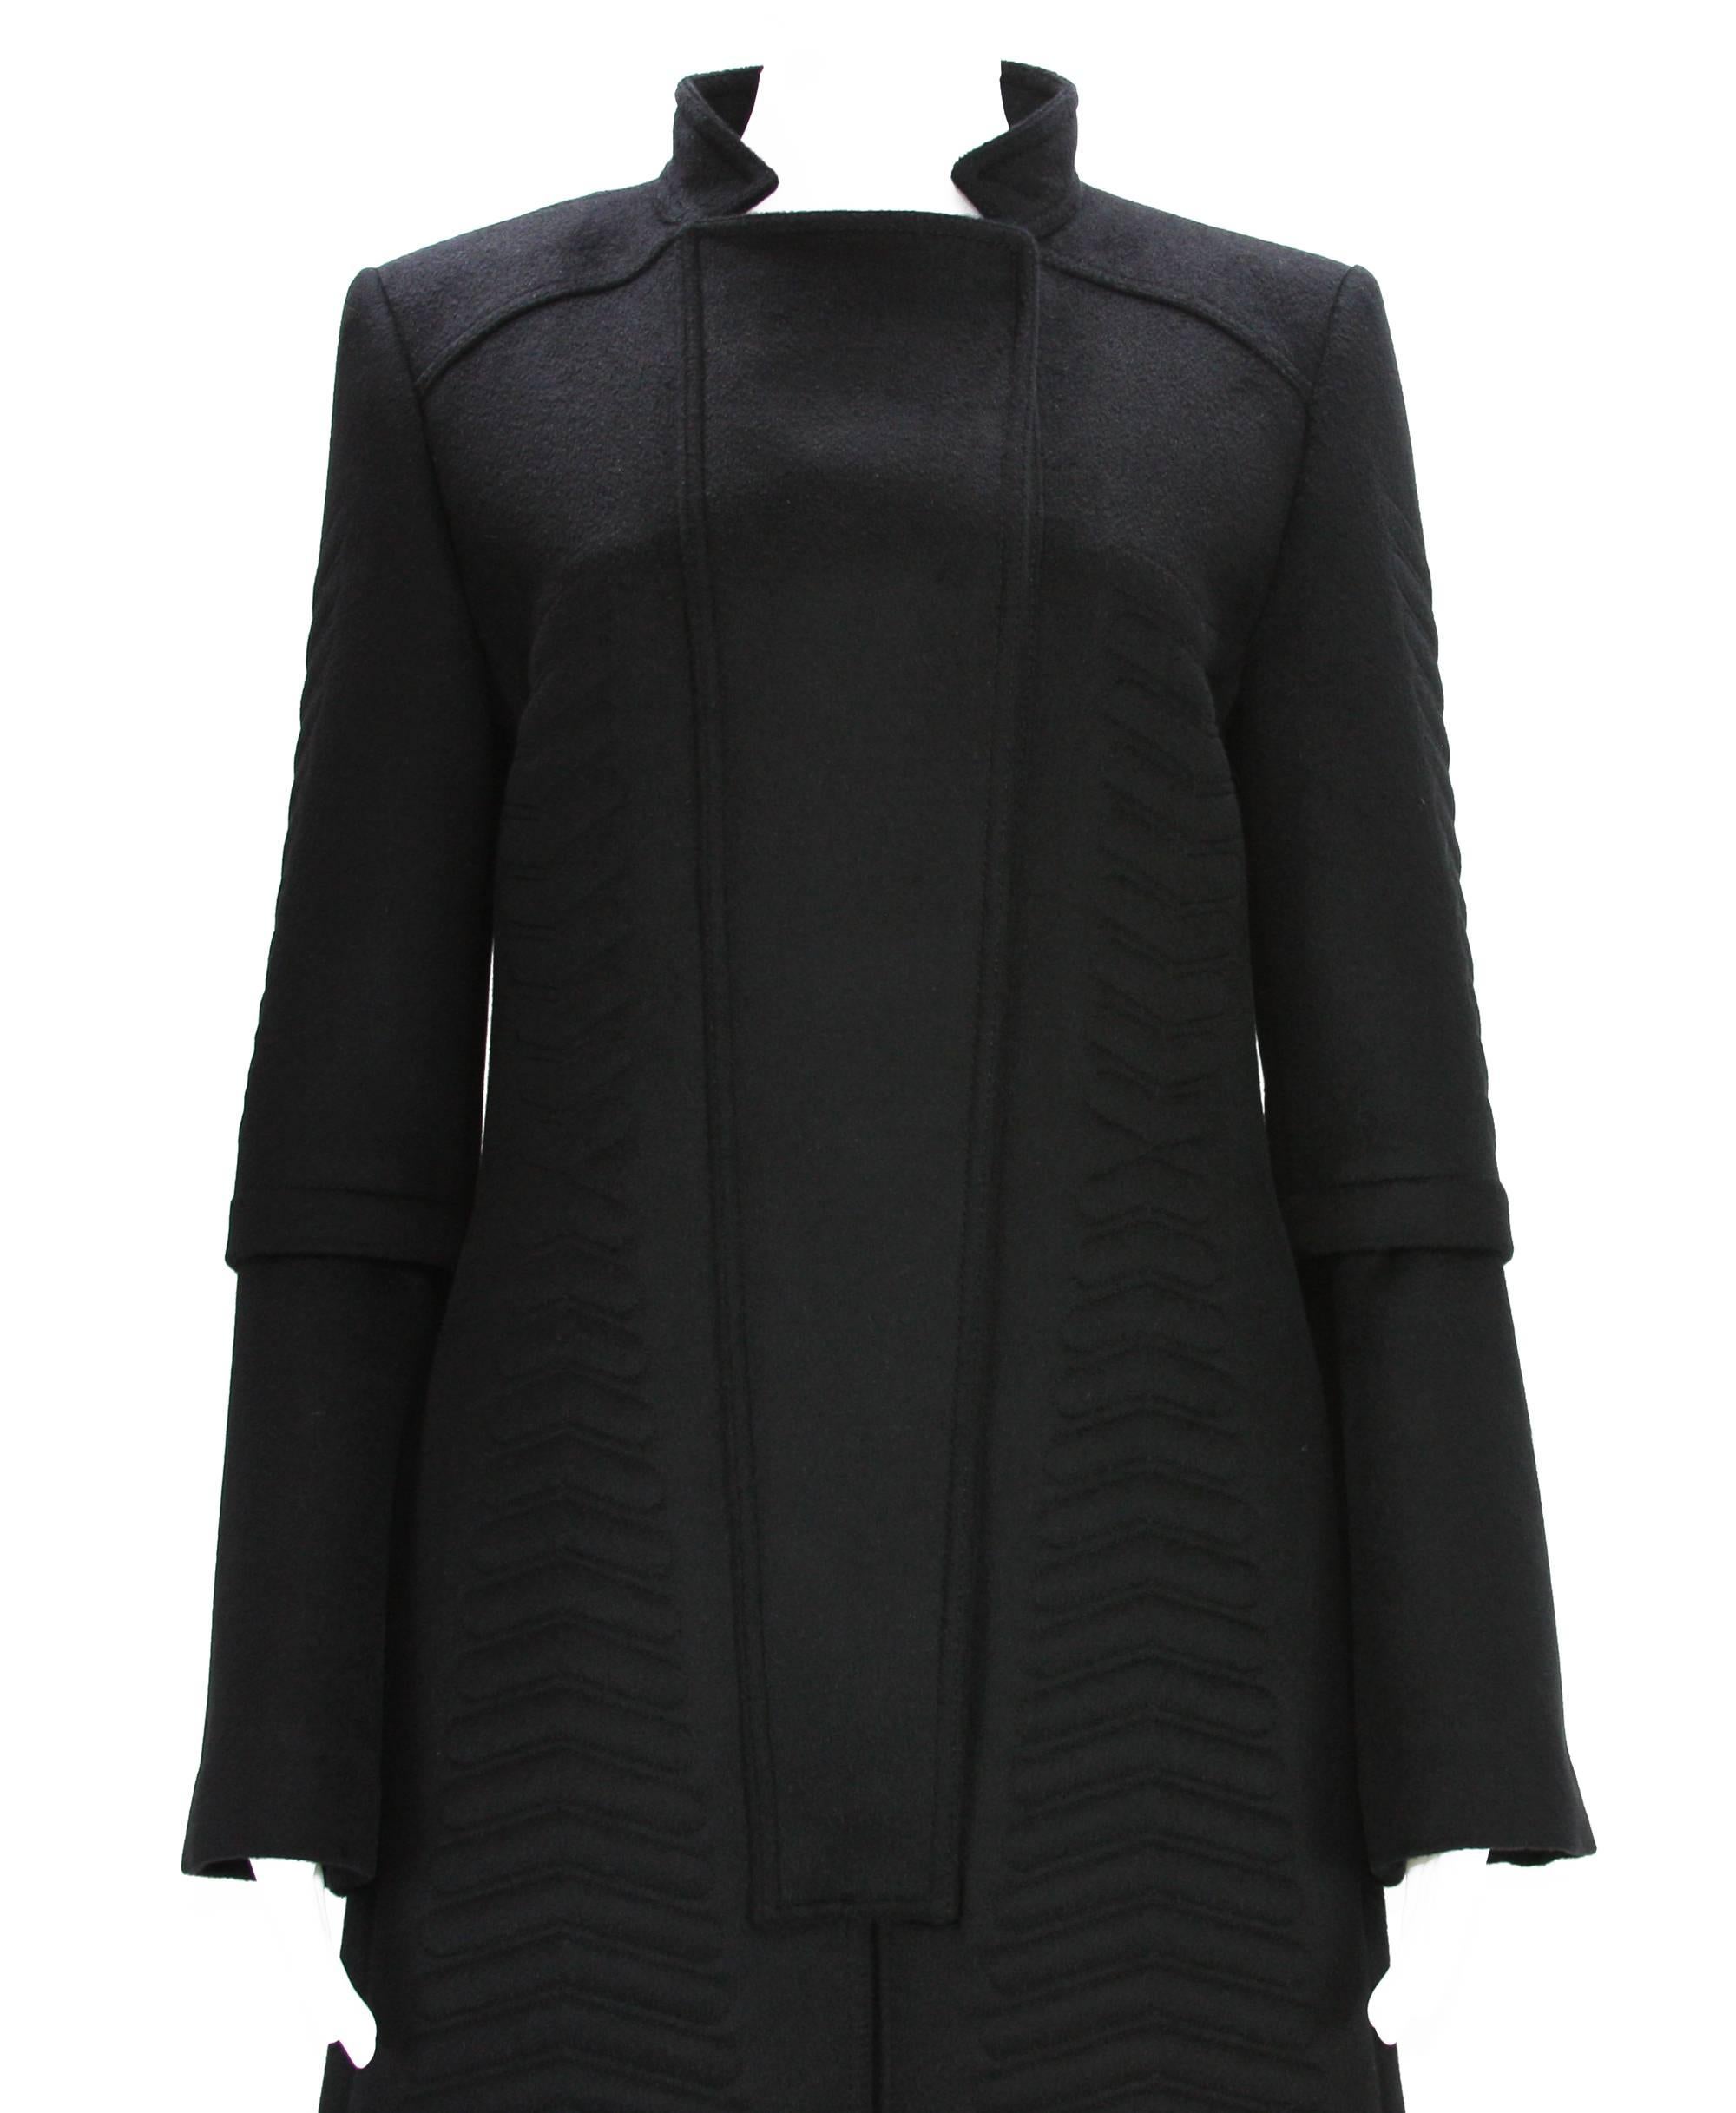 A/W 2004 Tom Ford for Gucci Chevron Quilting Black Angora Wool Coat It 44 - US 8 1